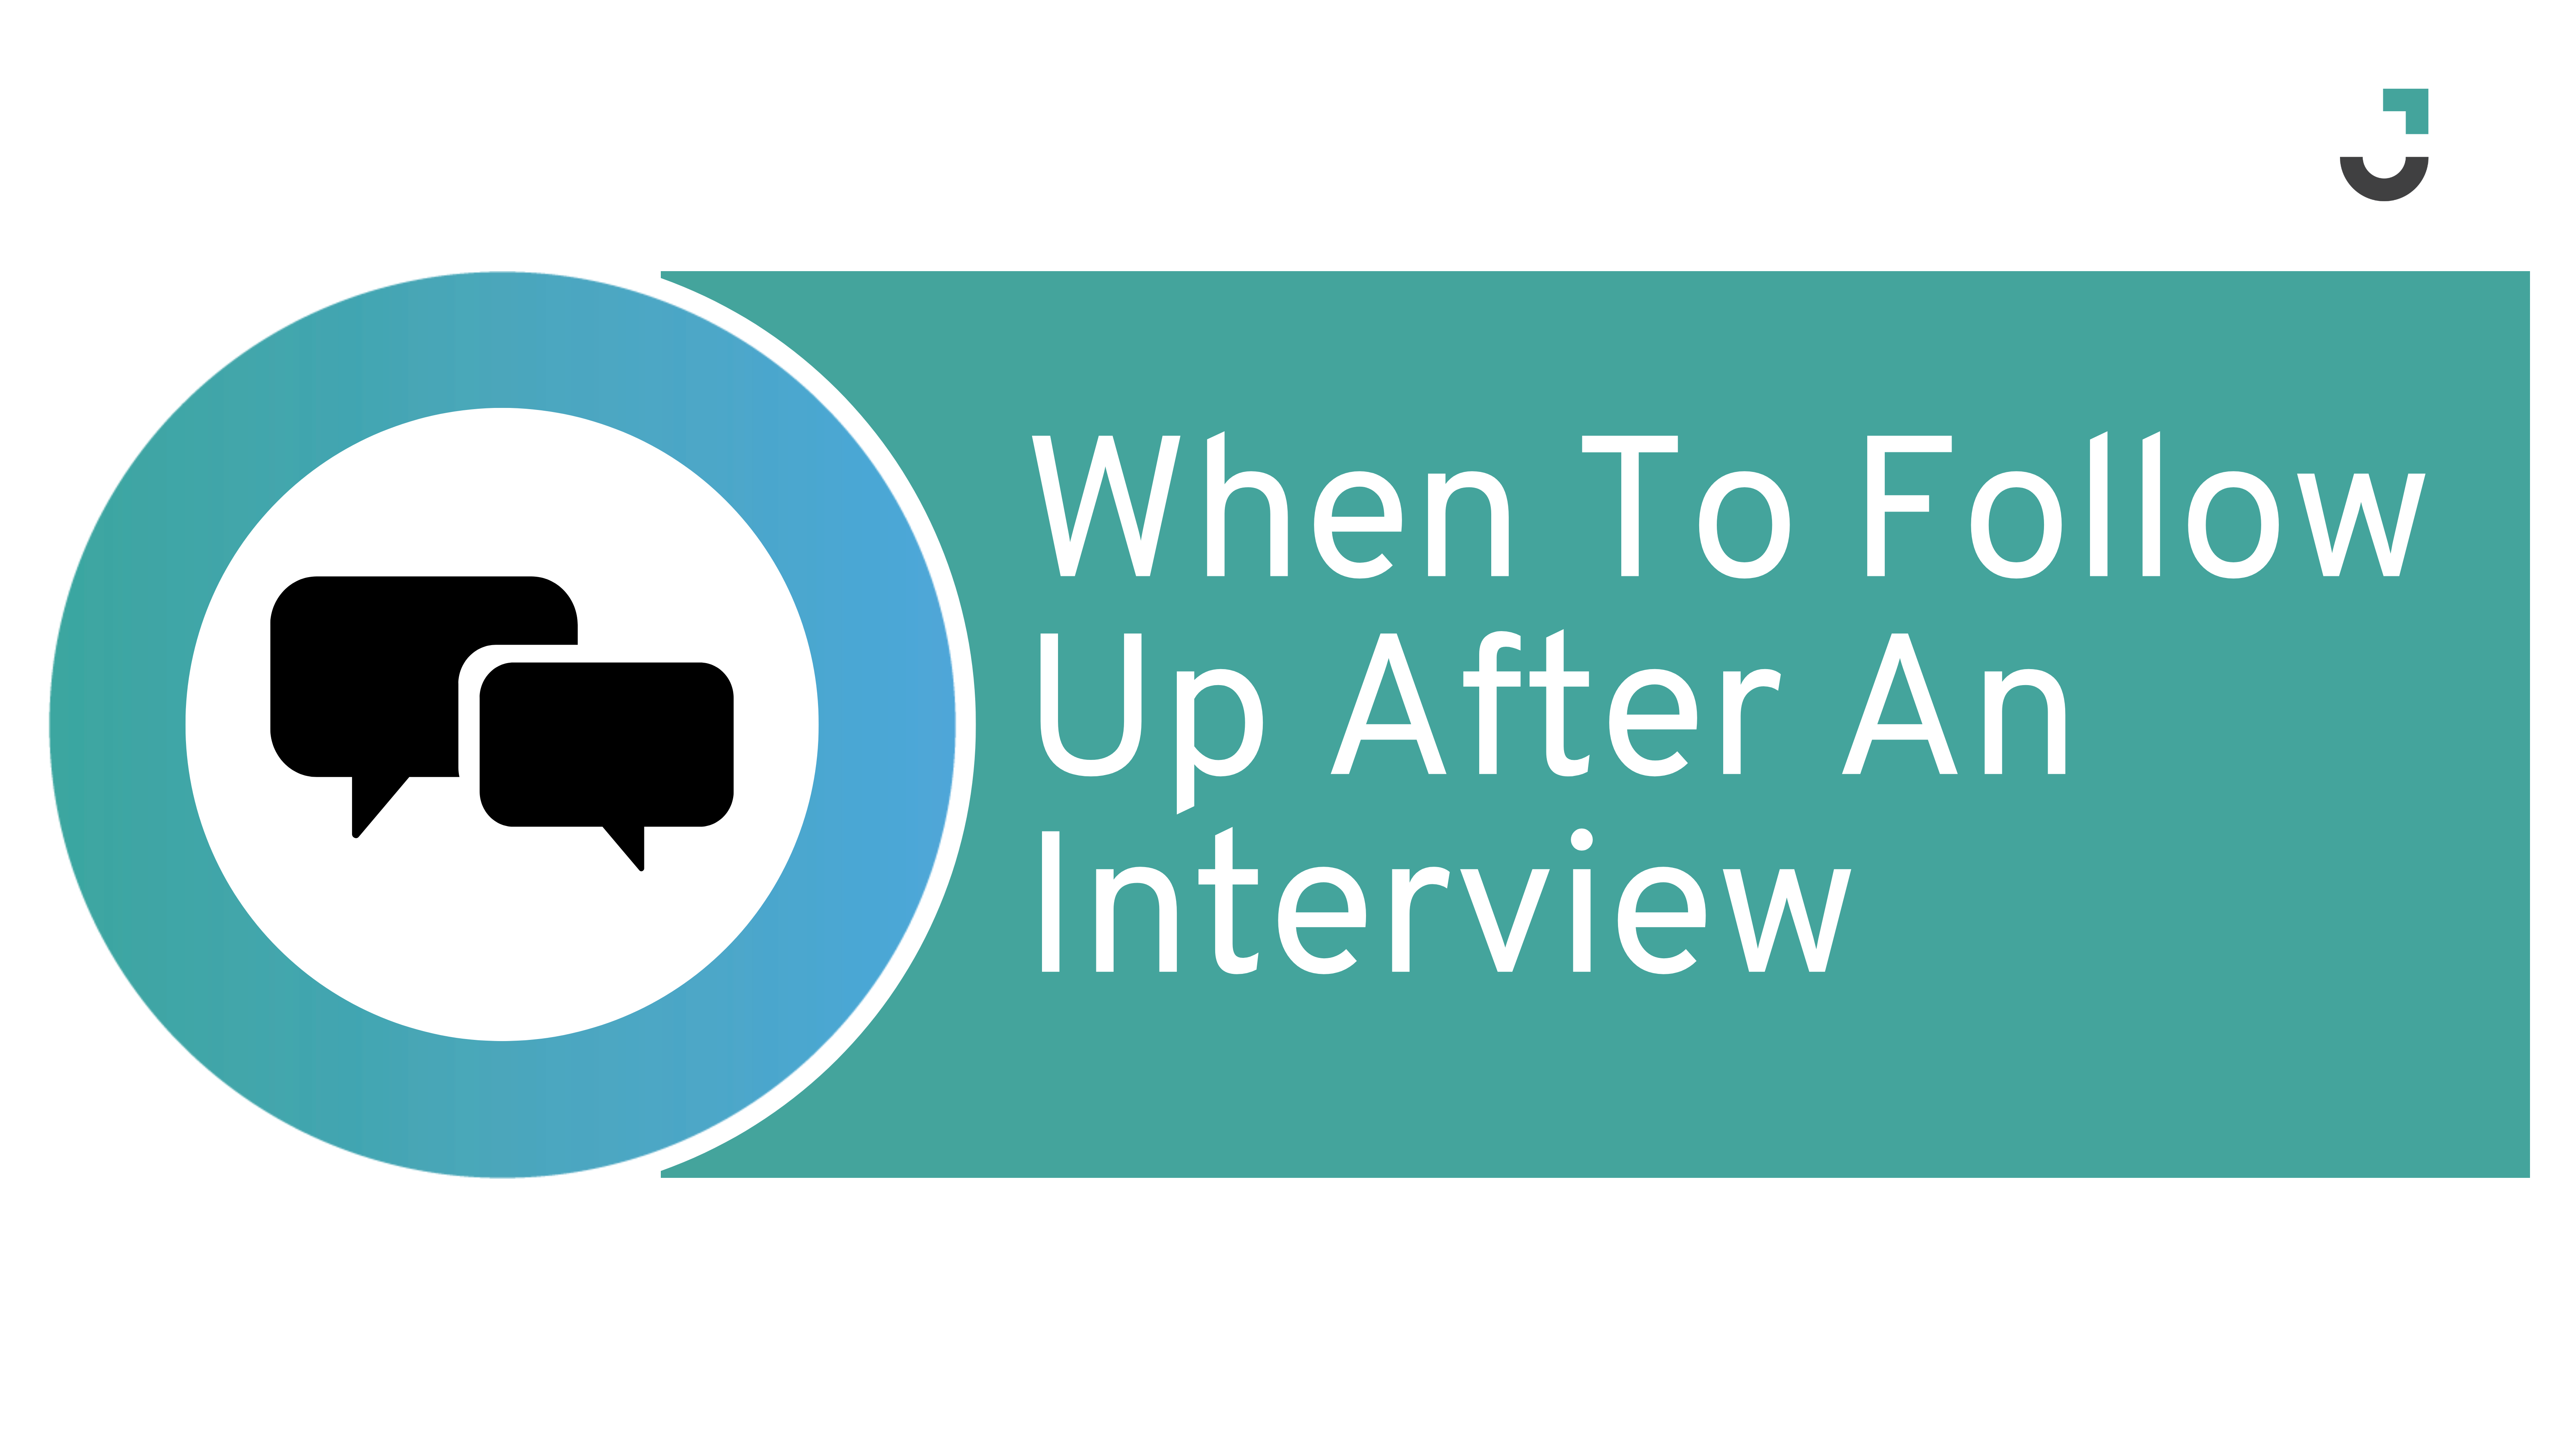 Timing Matters: When to Follow Up After an Interview